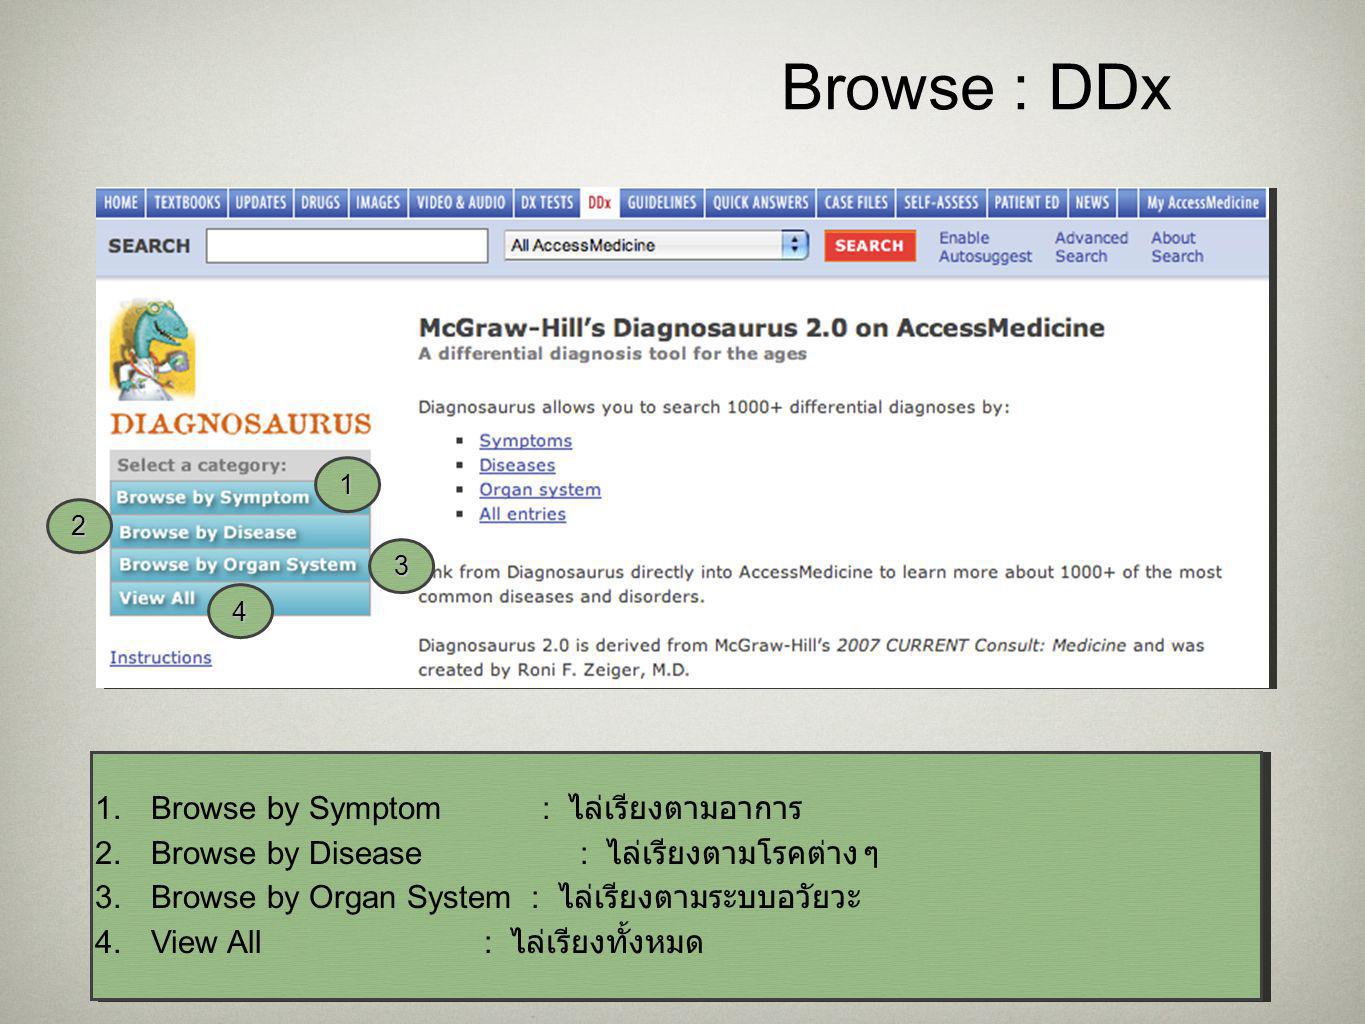 17 Browse : DDx Browse by Symptom : ไล่เรียงตามอาการ 2.Browse by Disease : ไล่เรียงตามโรคต่าง ๆ 3.Browse by Organ System : ไล่เรียงตามระบบอวัยวะ 4.View All : ไล่เรียงทั้งหมด 1.Browse by Symptom : ไล่เรียงตามอาการ 2.Browse by Disease : ไล่เรียงตามโรคต่าง ๆ 3.Browse by Organ System : ไล่เรียงตามระบบอวัยวะ 4.View All : ไล่เรียงทั้งหมด